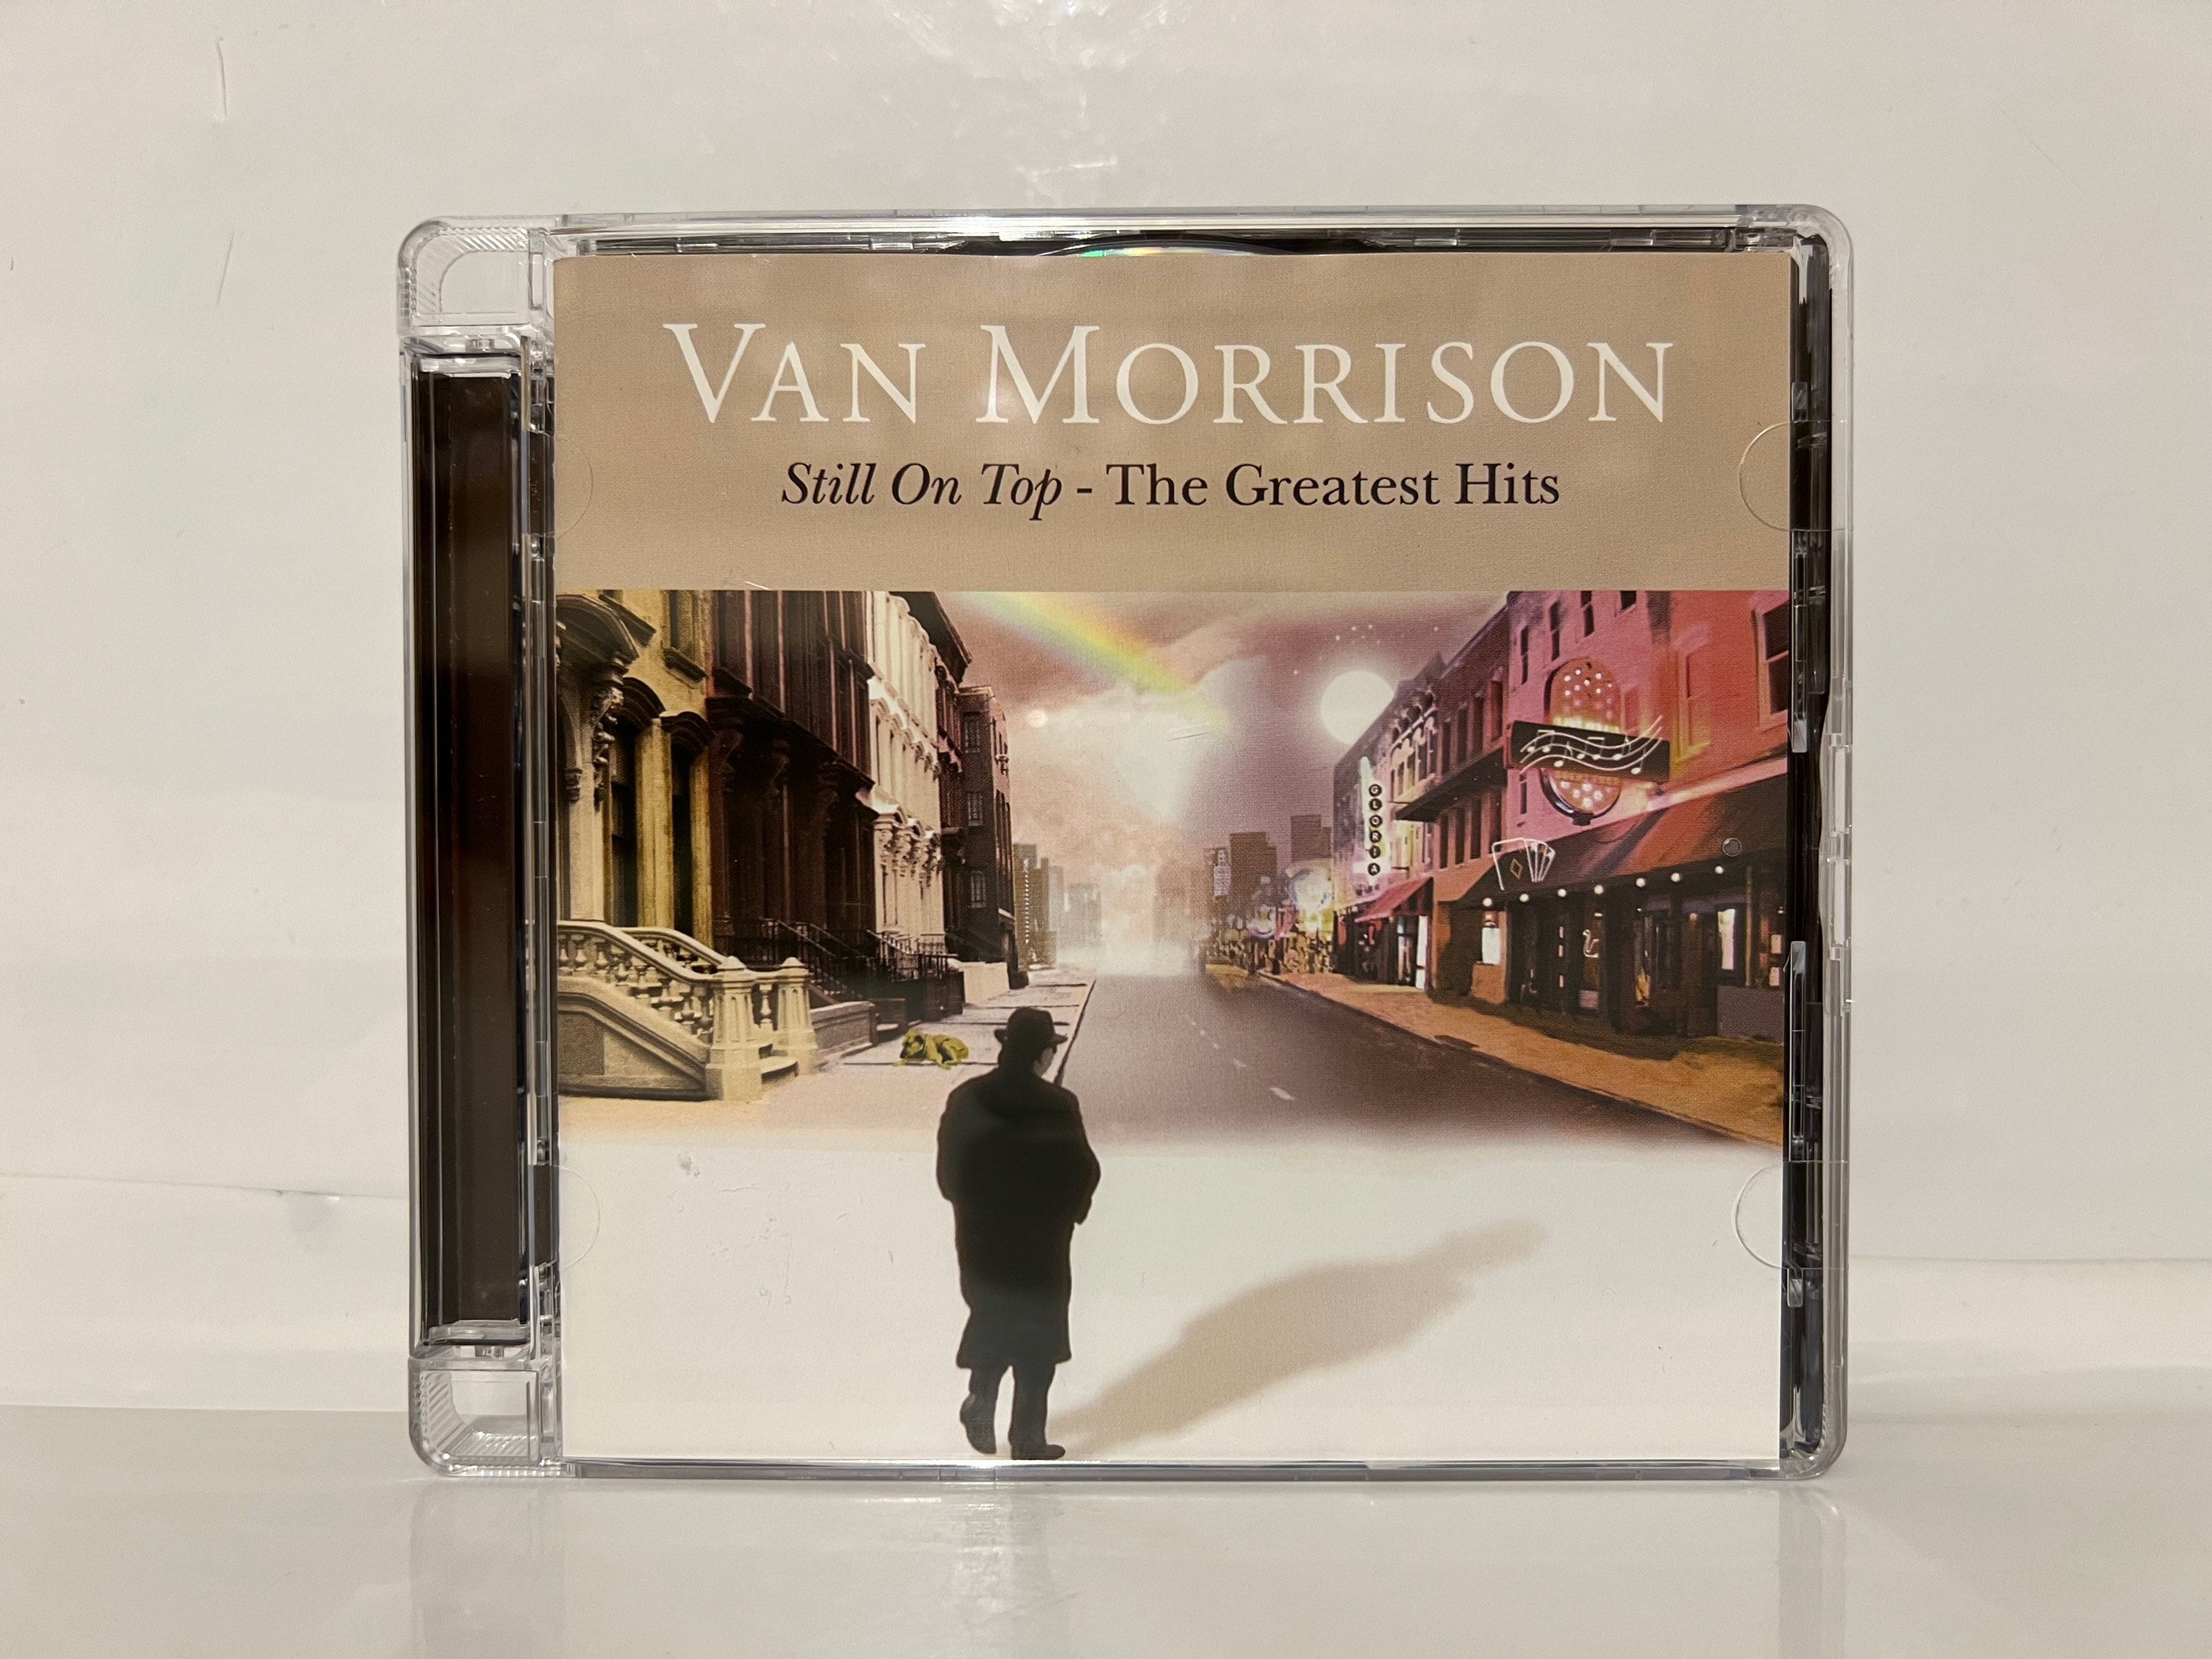 Van Morrison CD Collection Album on Top the Greatest - Etsy